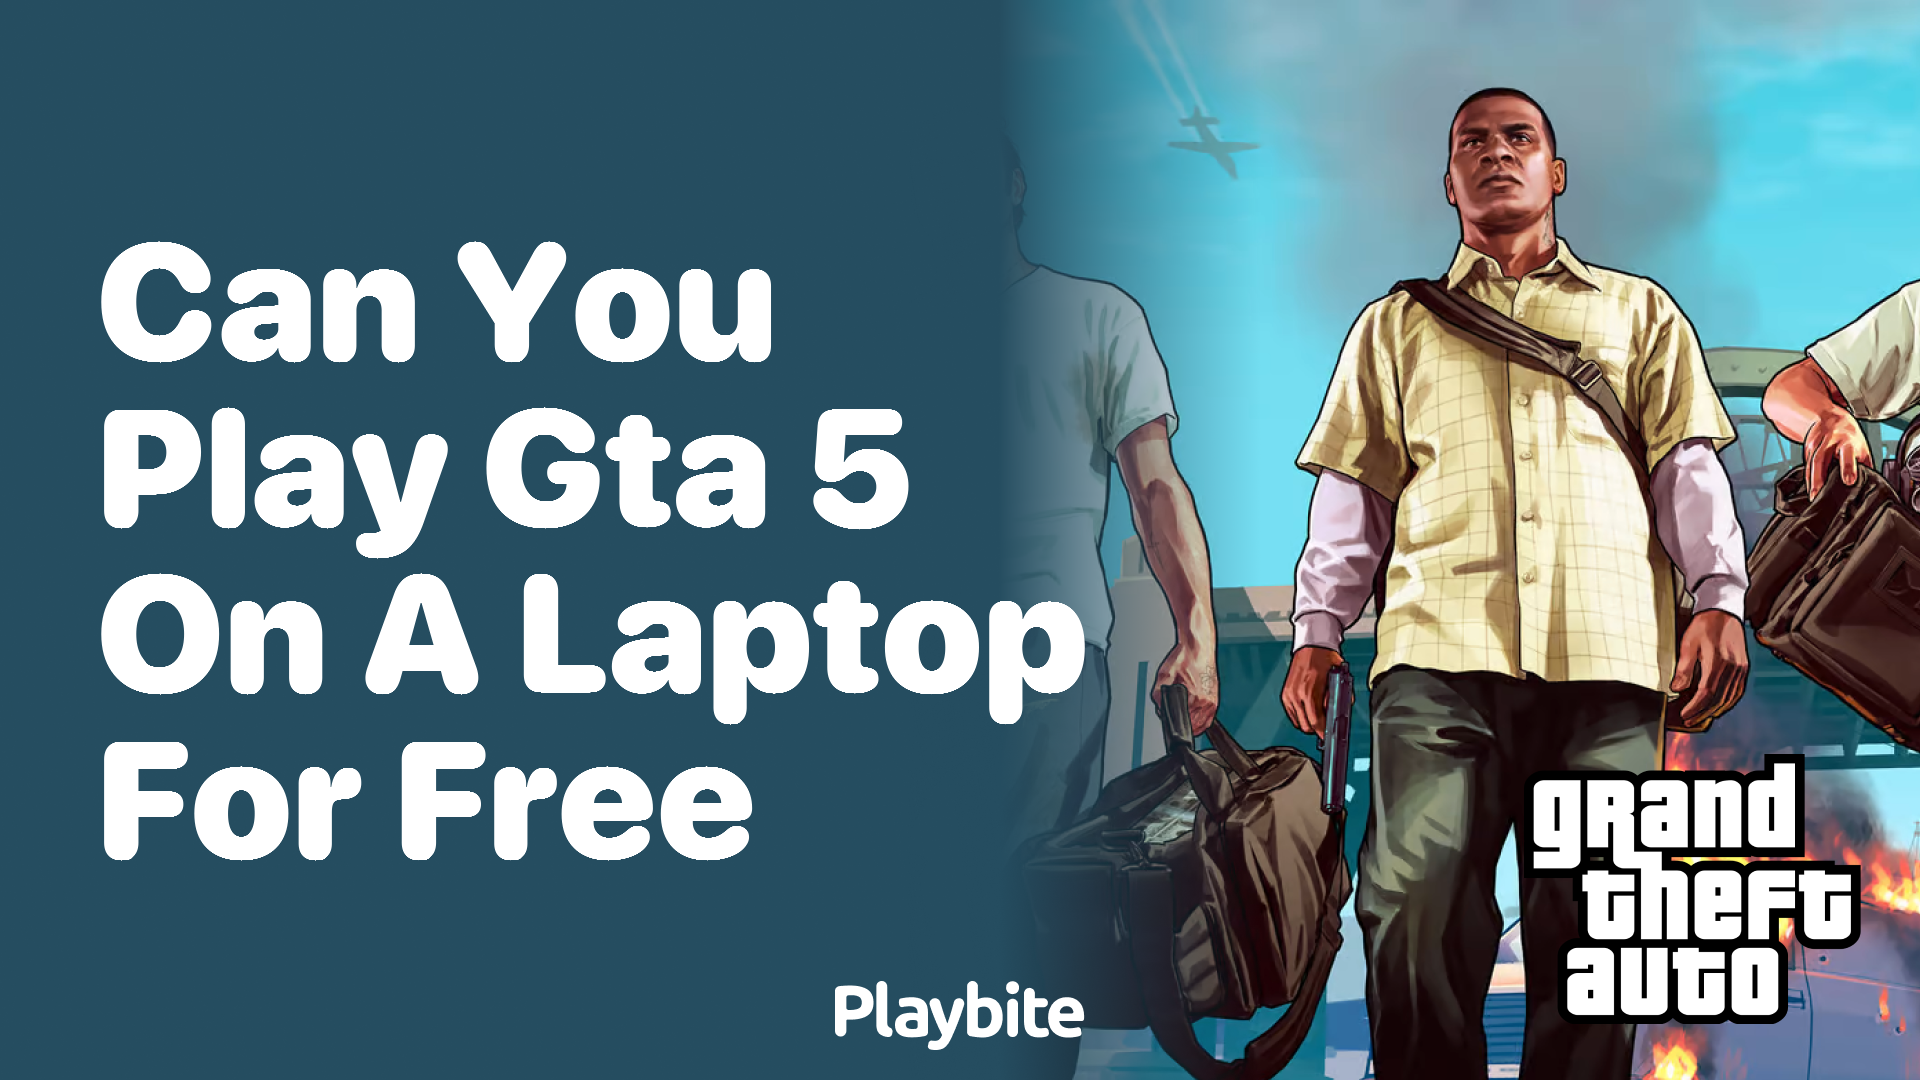 Can you play GTA 5 on a laptop for free?